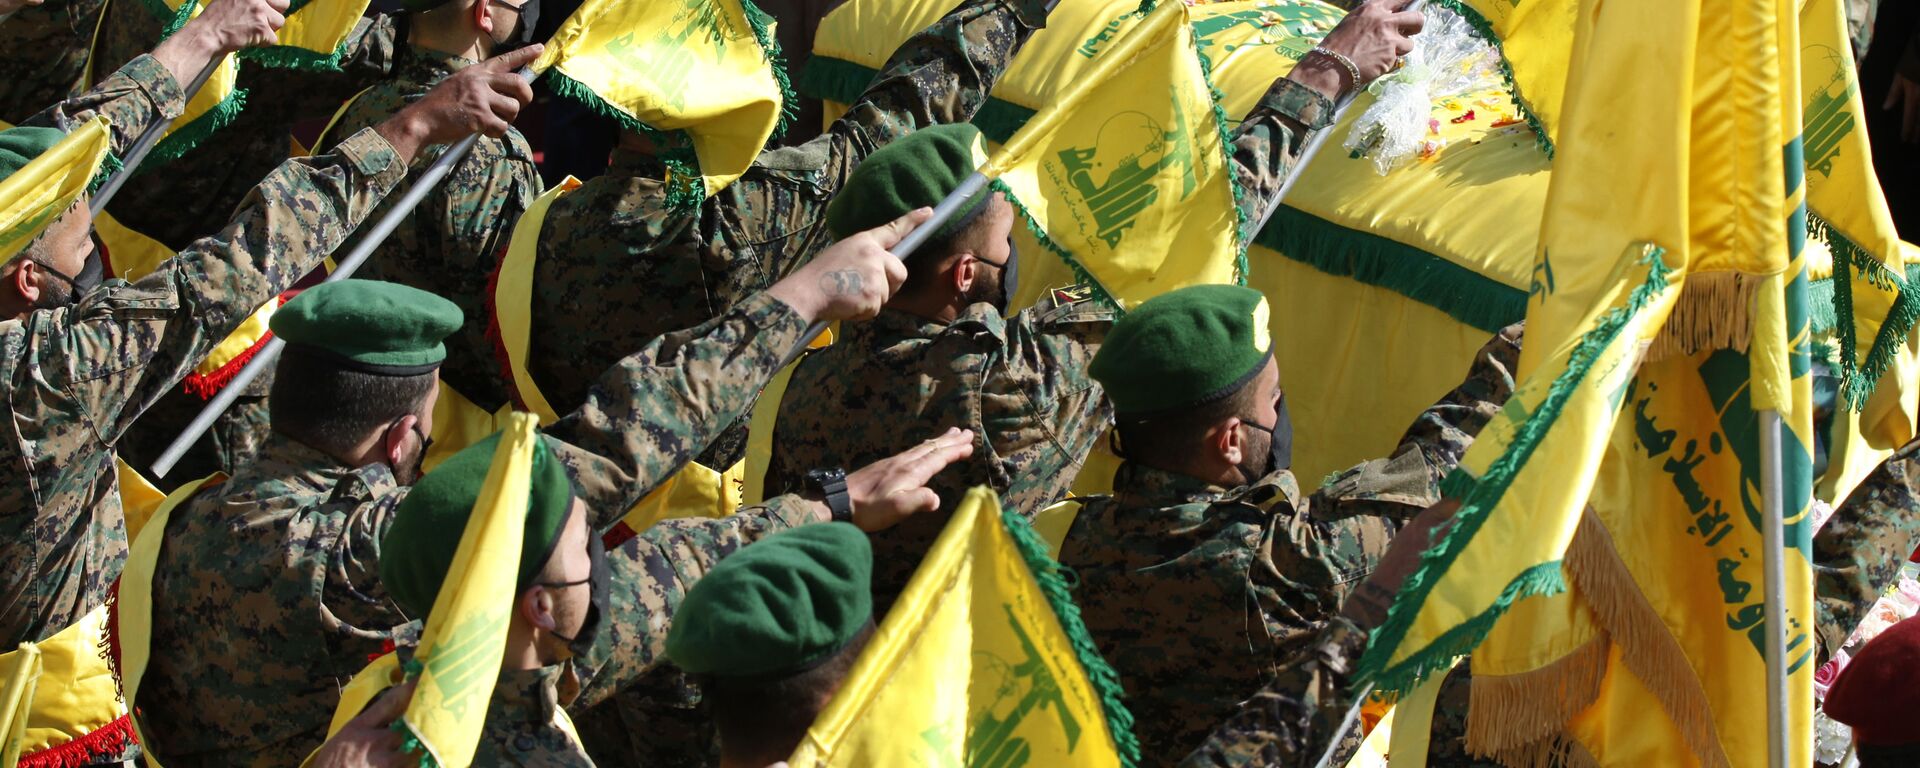 Hezbollah fighters raise their group flags, as they salut the coffin of their comrade Mohammed Tahhan who was shot dead on Friday by Israeli forces along the Lebanon-Israel border, during his funeral procession, in the southern village of Adloun, Lebanon, Saturday, 15 May 2021 - Sputnik International, 1920, 13.08.2021